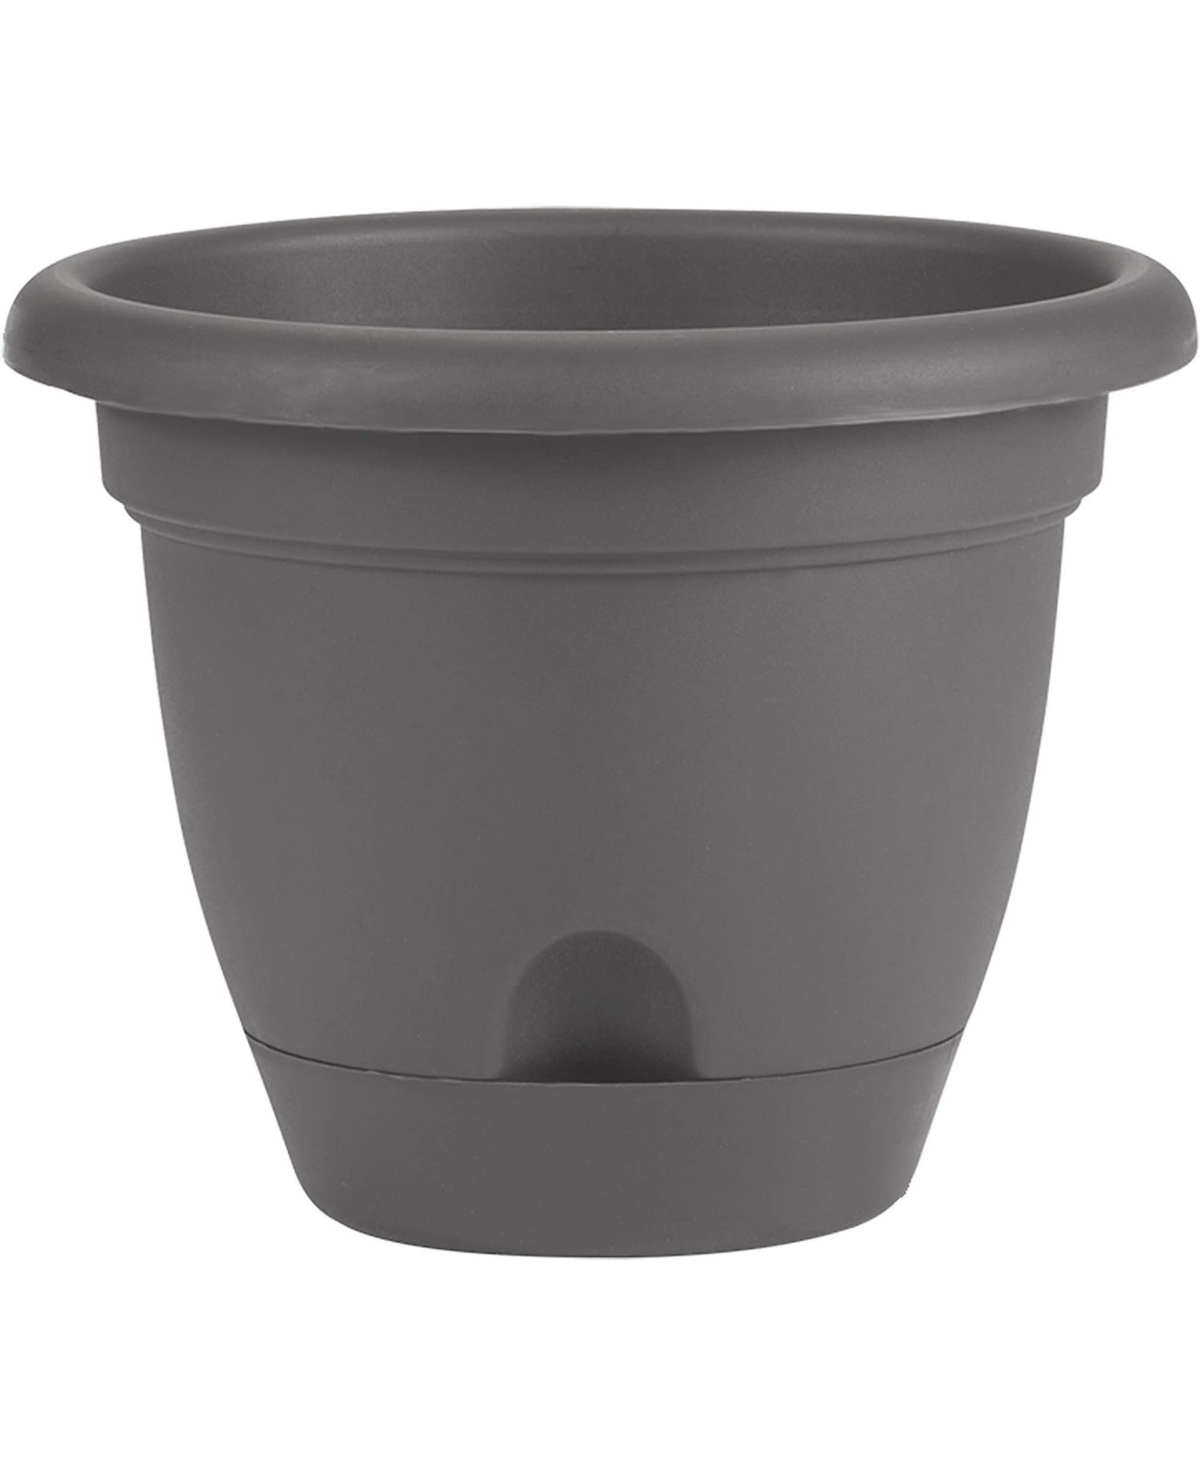 Lucca Self-Watering Planter with Saucer, Charcoal, 14 Inches - Charcoal